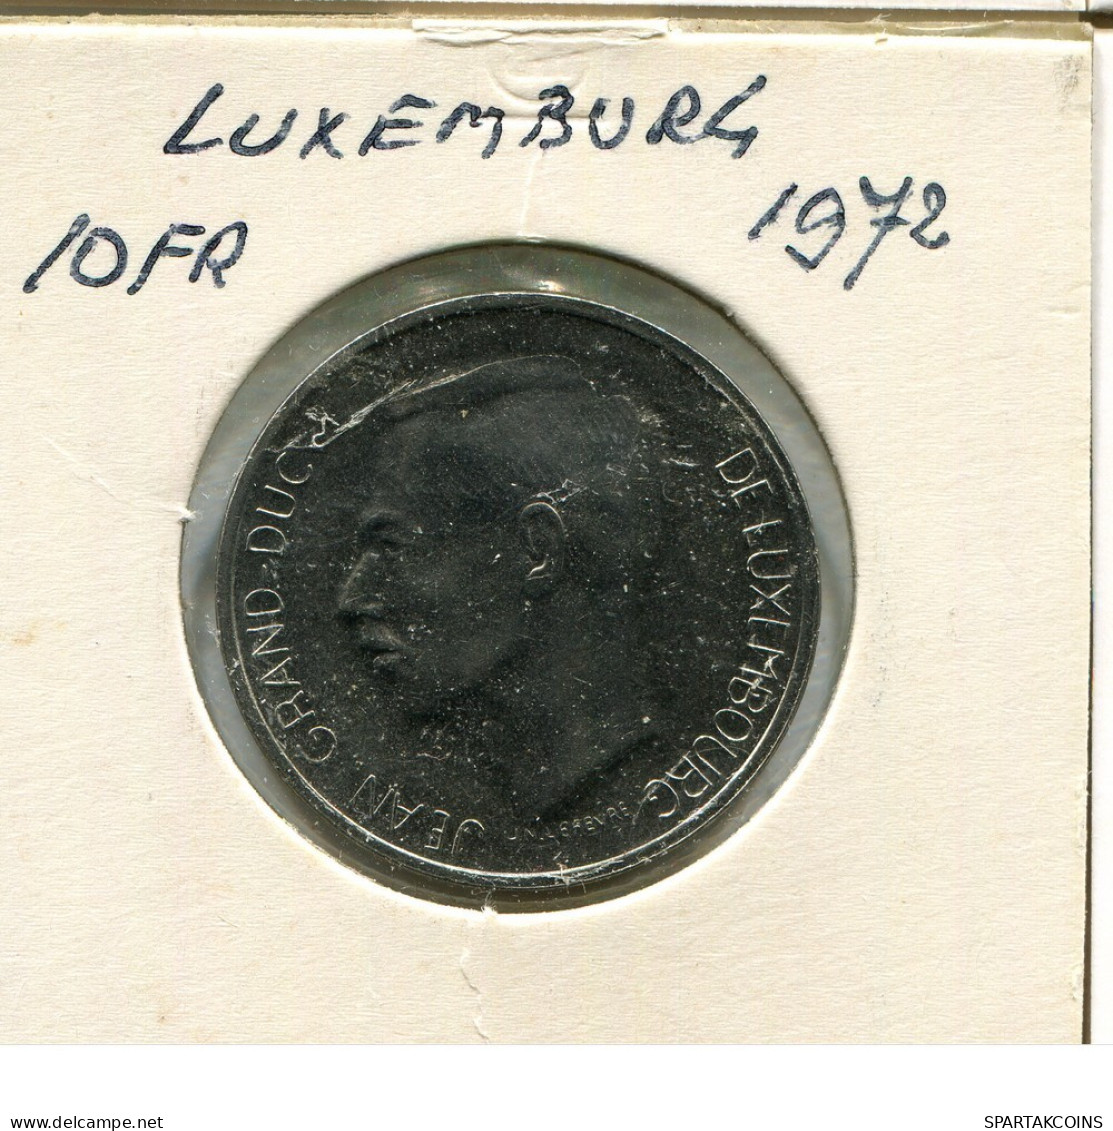 10 FRANCS 1972 LUXEMBOURG Coin #AR687.U.A - Luxemburg